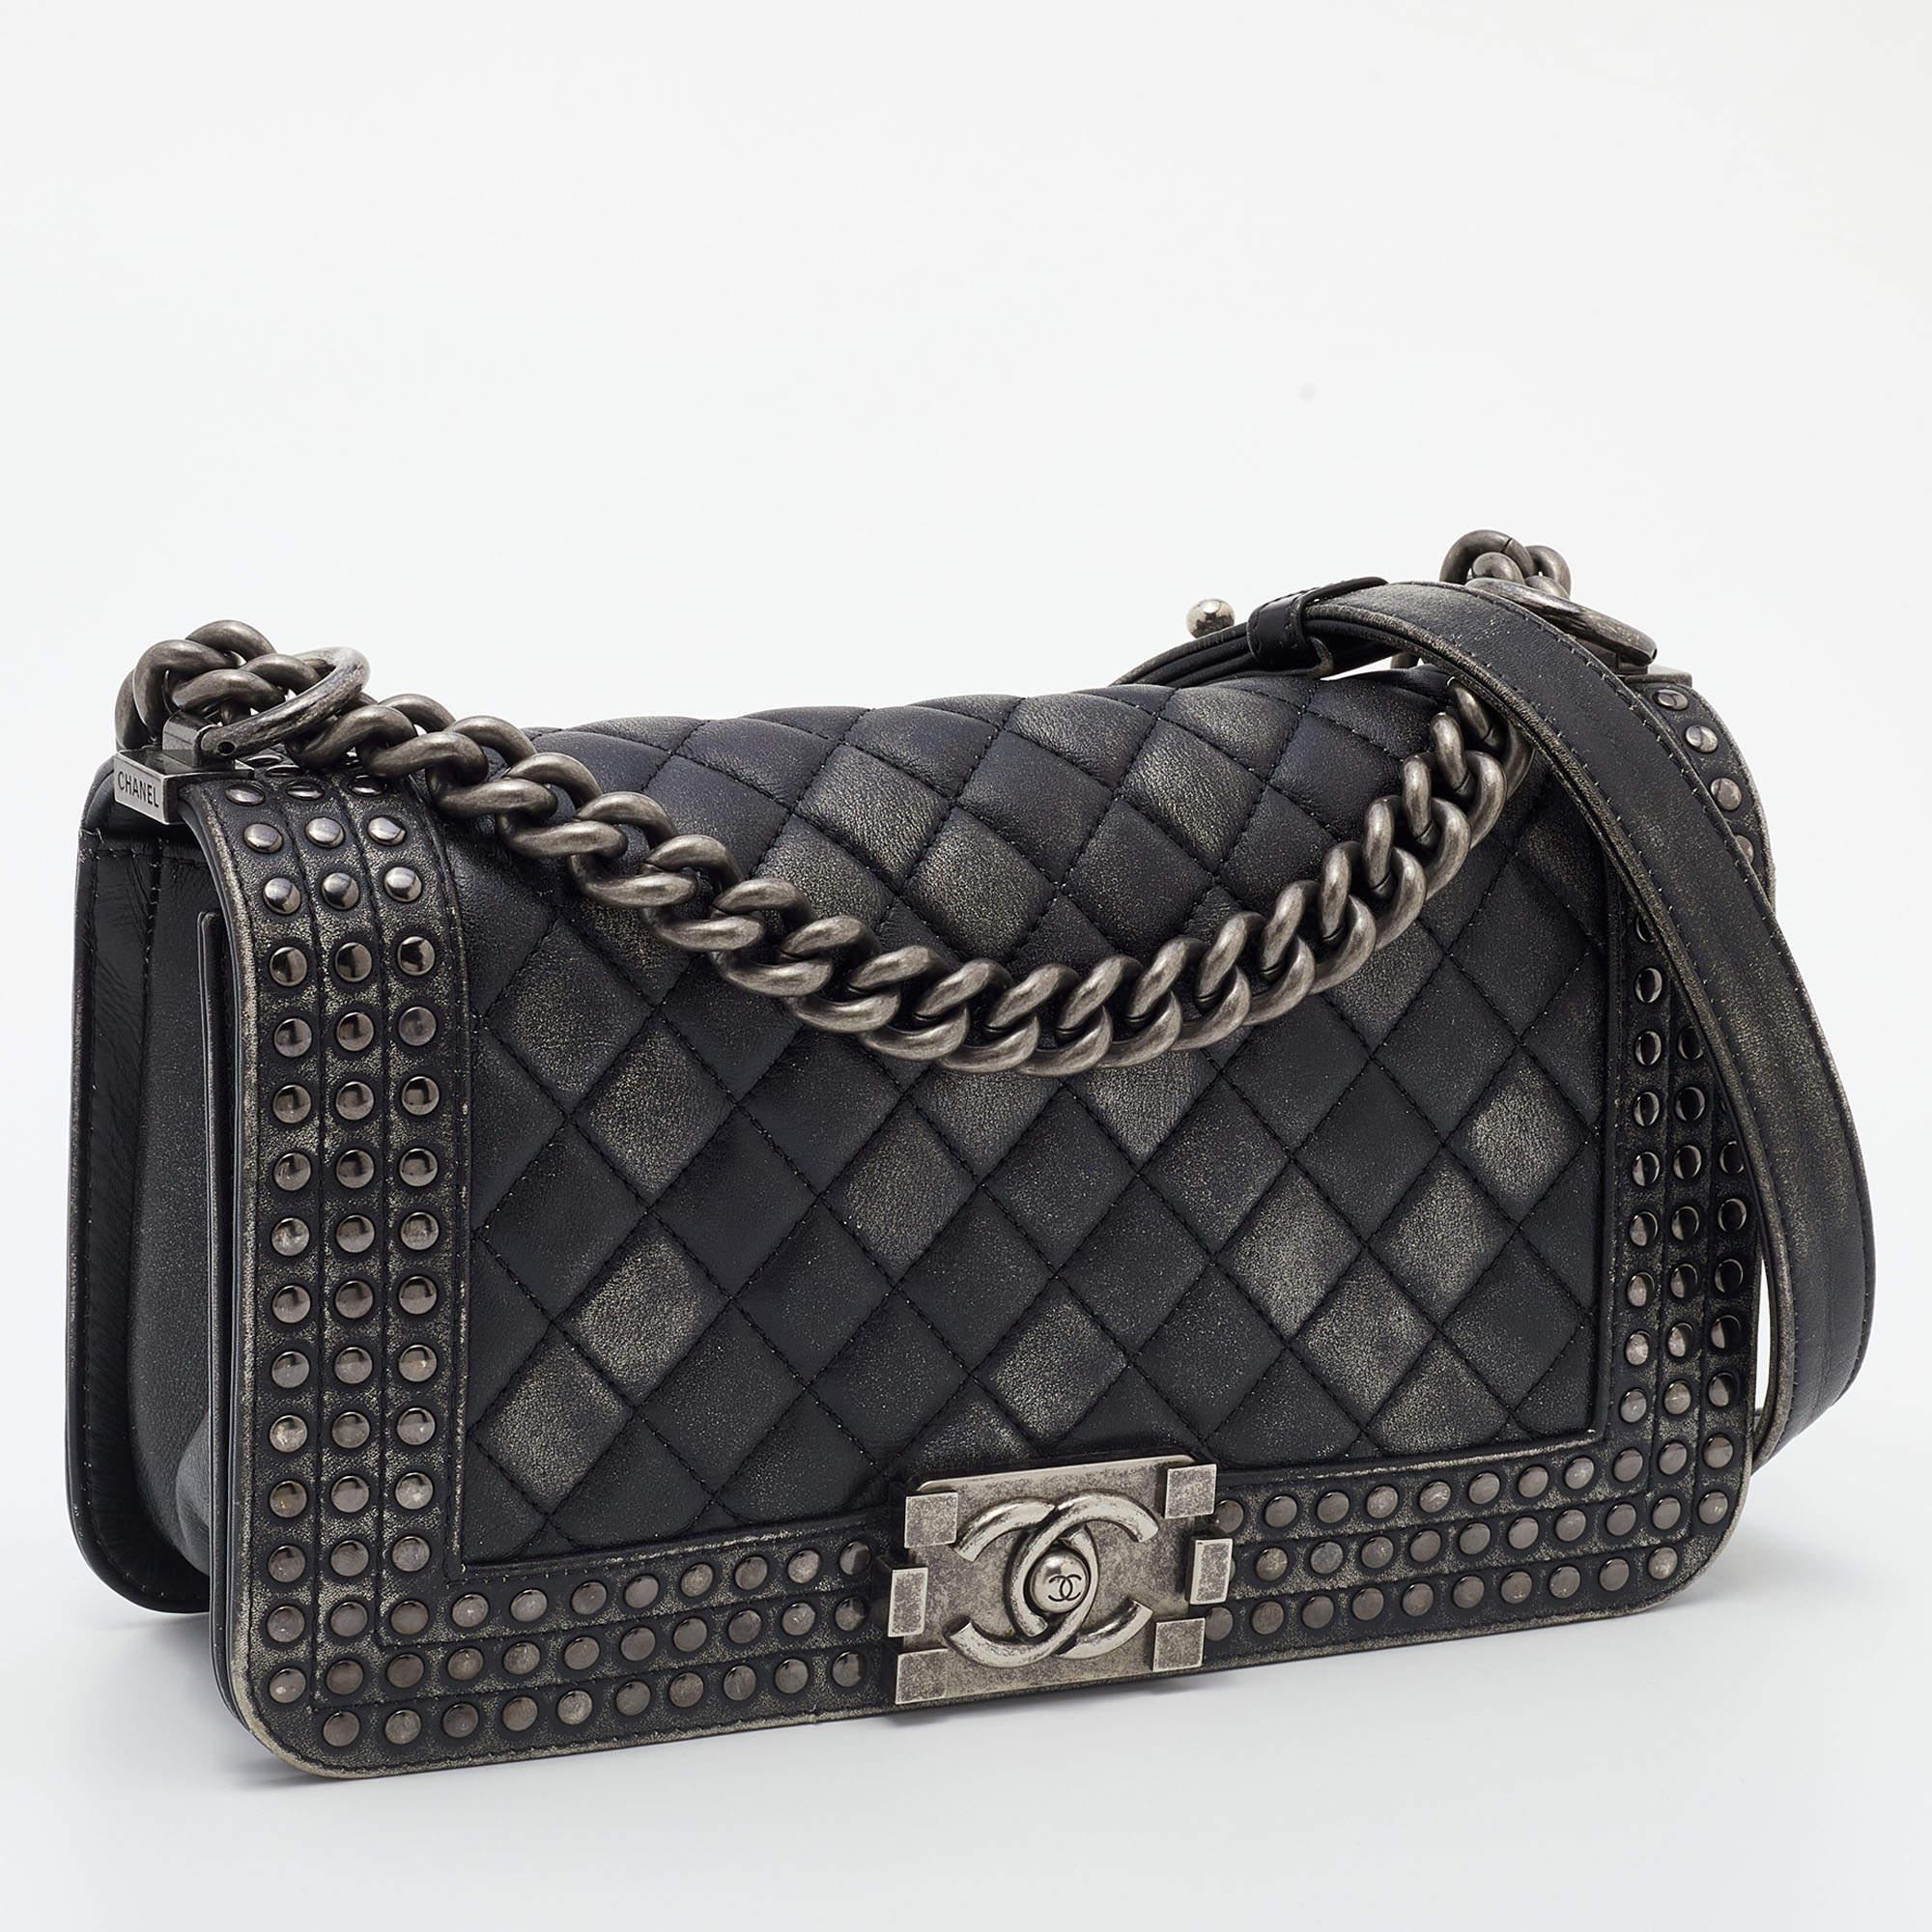 Women's Chanel Black/Grey Quilted Leather Medium Studded Boy Bag